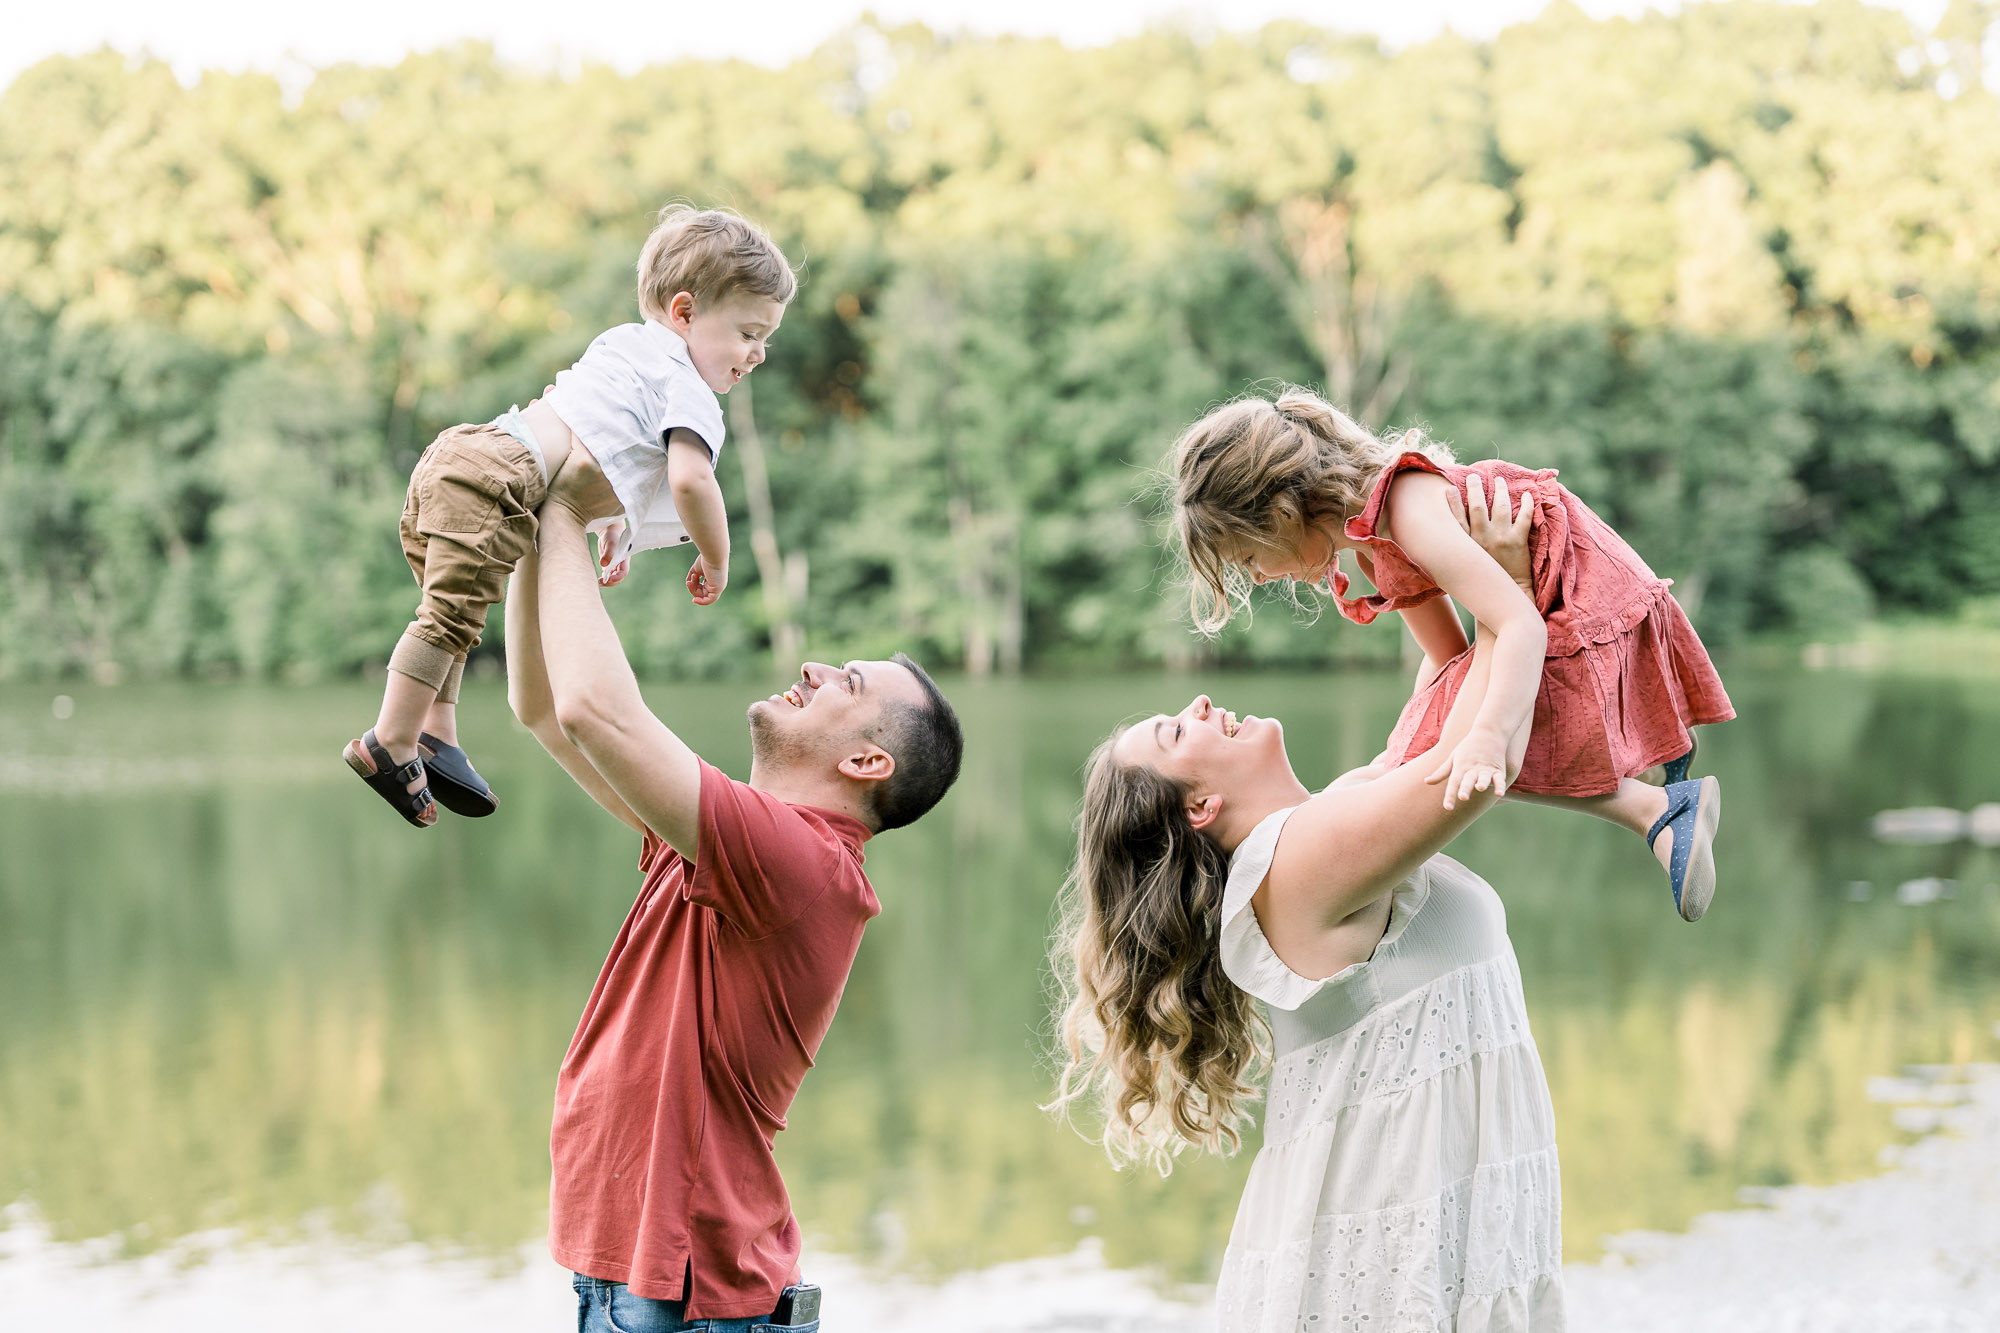 Parents lift their kids up in the air by the lake during the lifestyle family photography session at Shrewsbury, Massachusetts